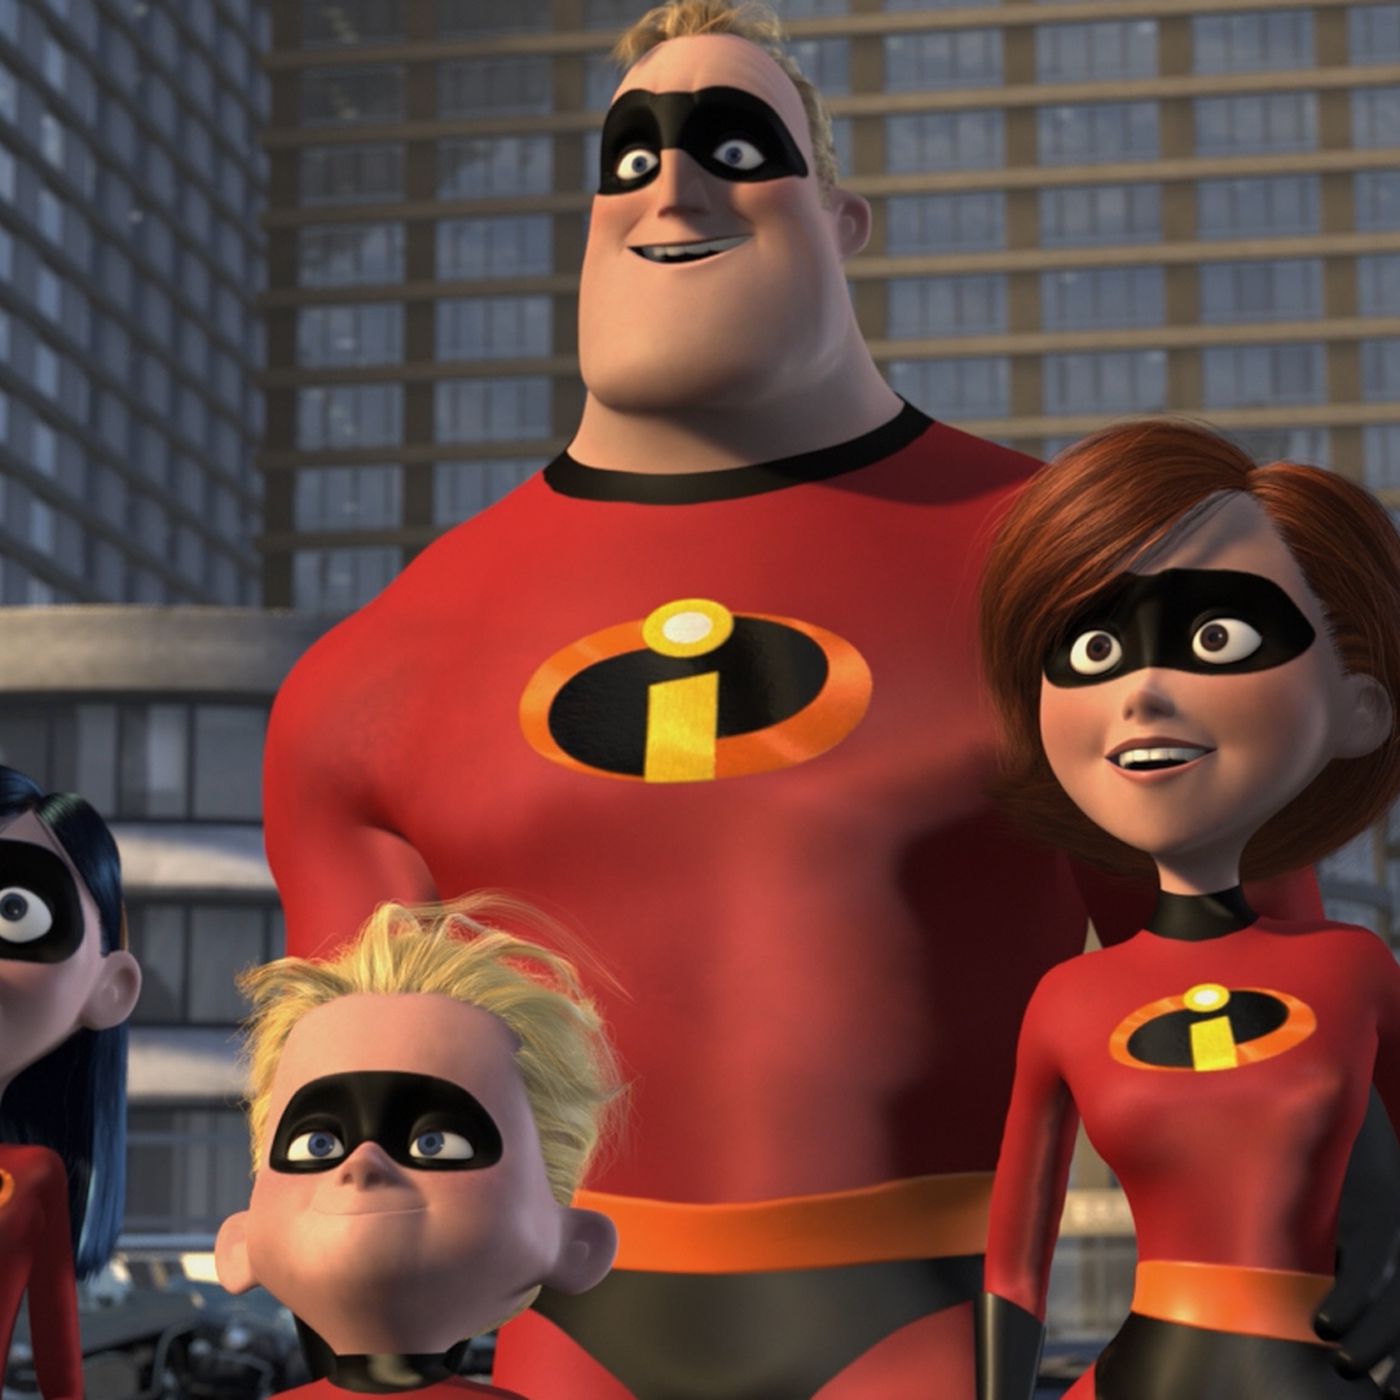 Incredibles 2 review: Pixar's fun sequel has a lot to say. Maybe too much